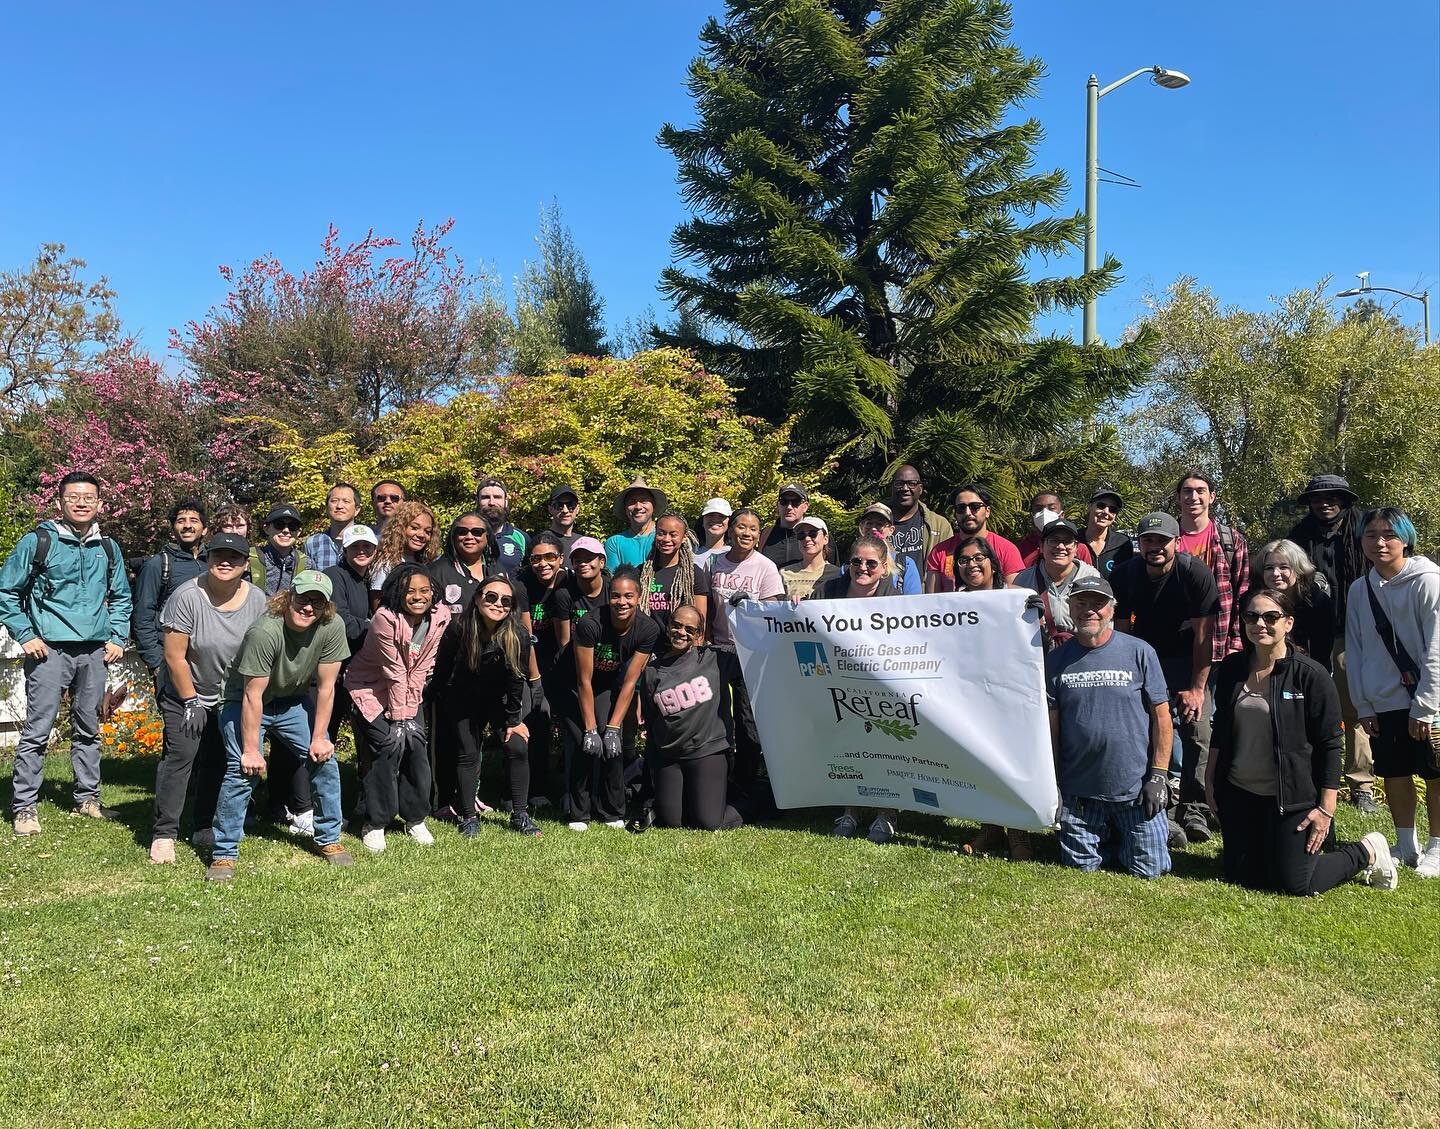 On Saturday, April 29th, 50 volunteers came together to green the streets of Oakland in the Old Town and Jack London neighborhoods! 🌲

@pardeehomemuseum wanted to express their thanks to Pacific Gas &amp; Electric Company for its generous sponsorshi